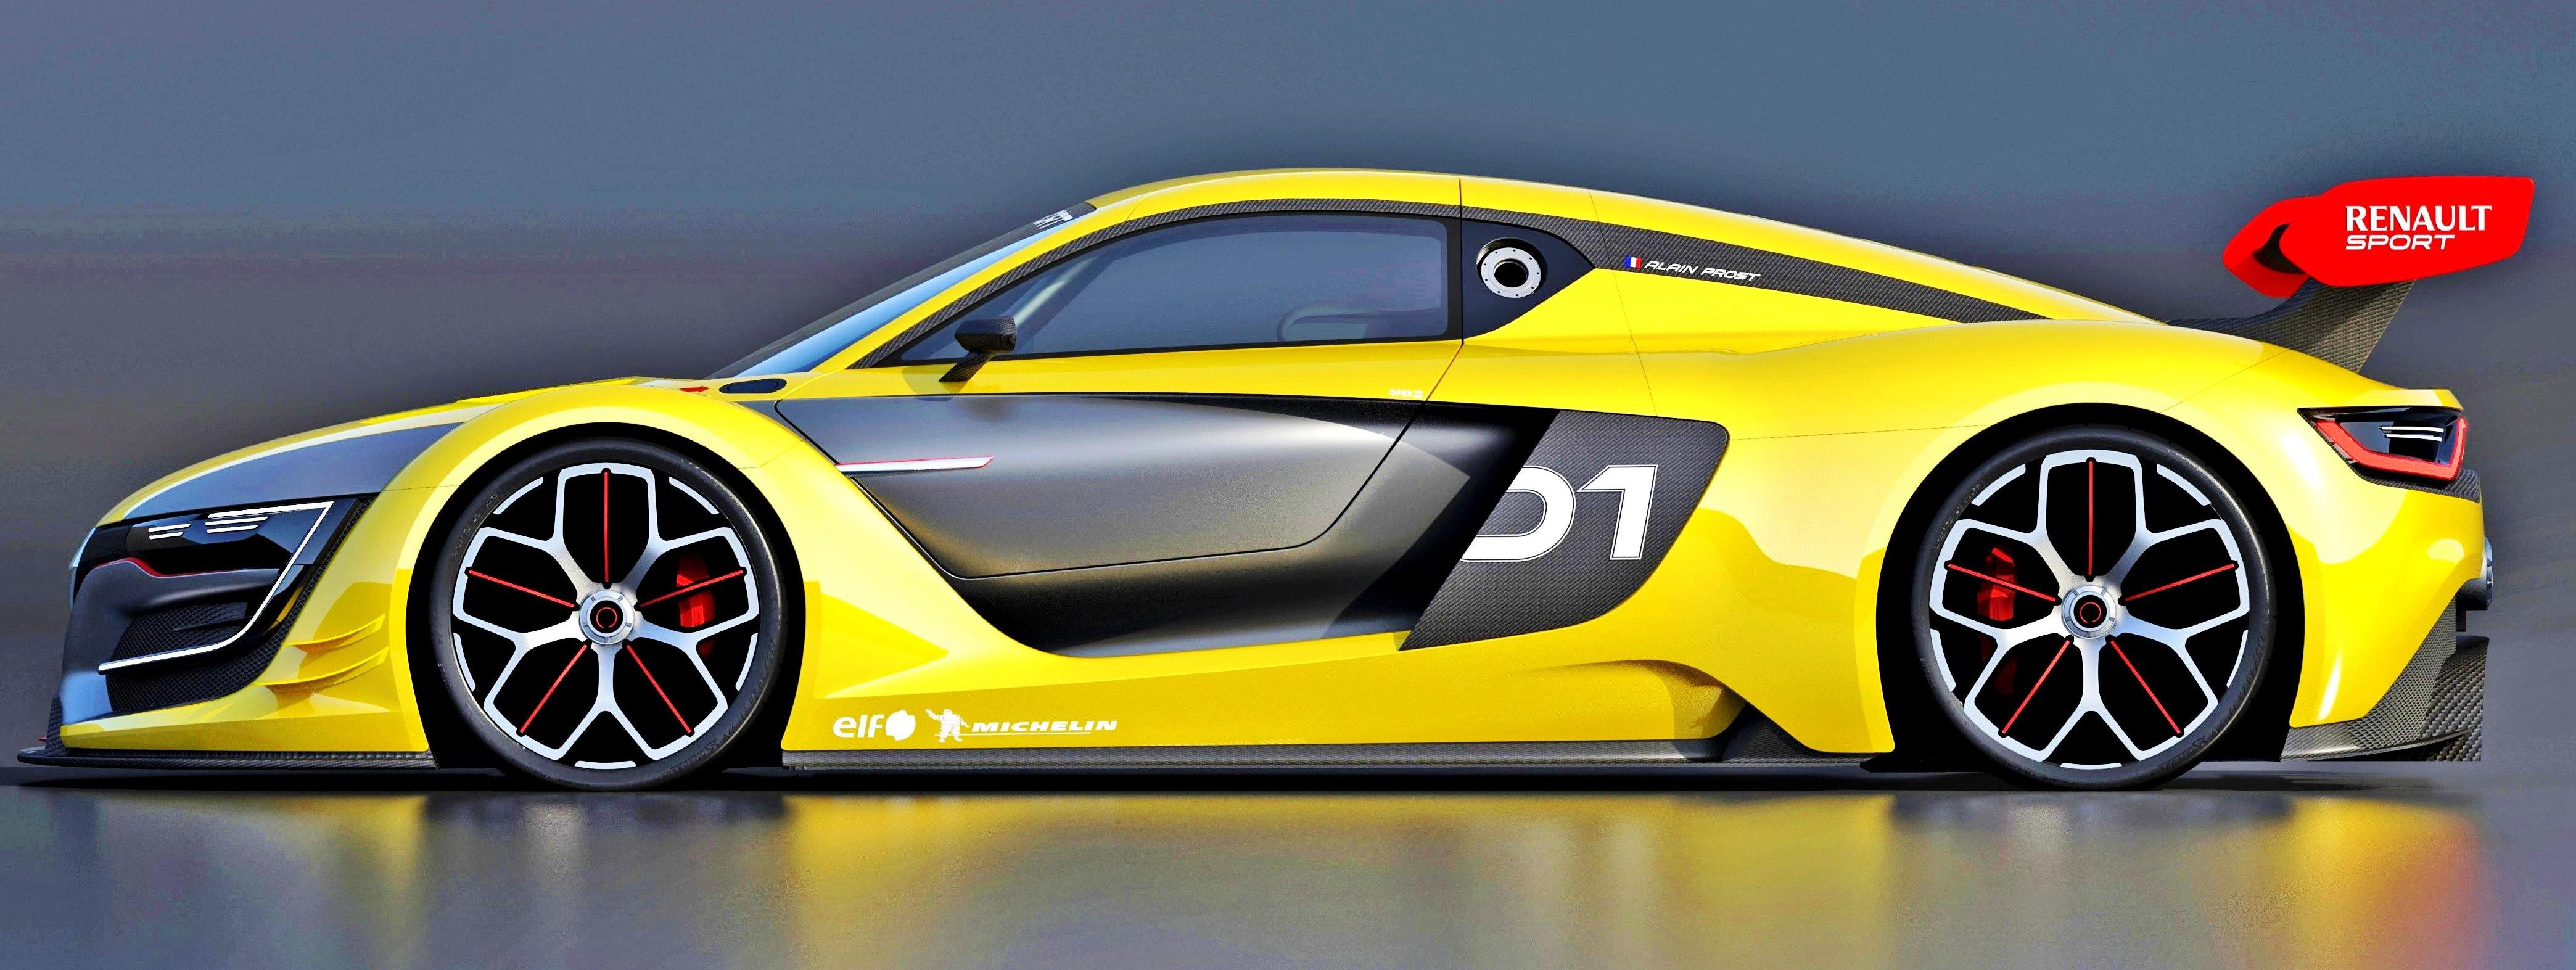 Anyone remembering the Renault RS 01 race car project ?